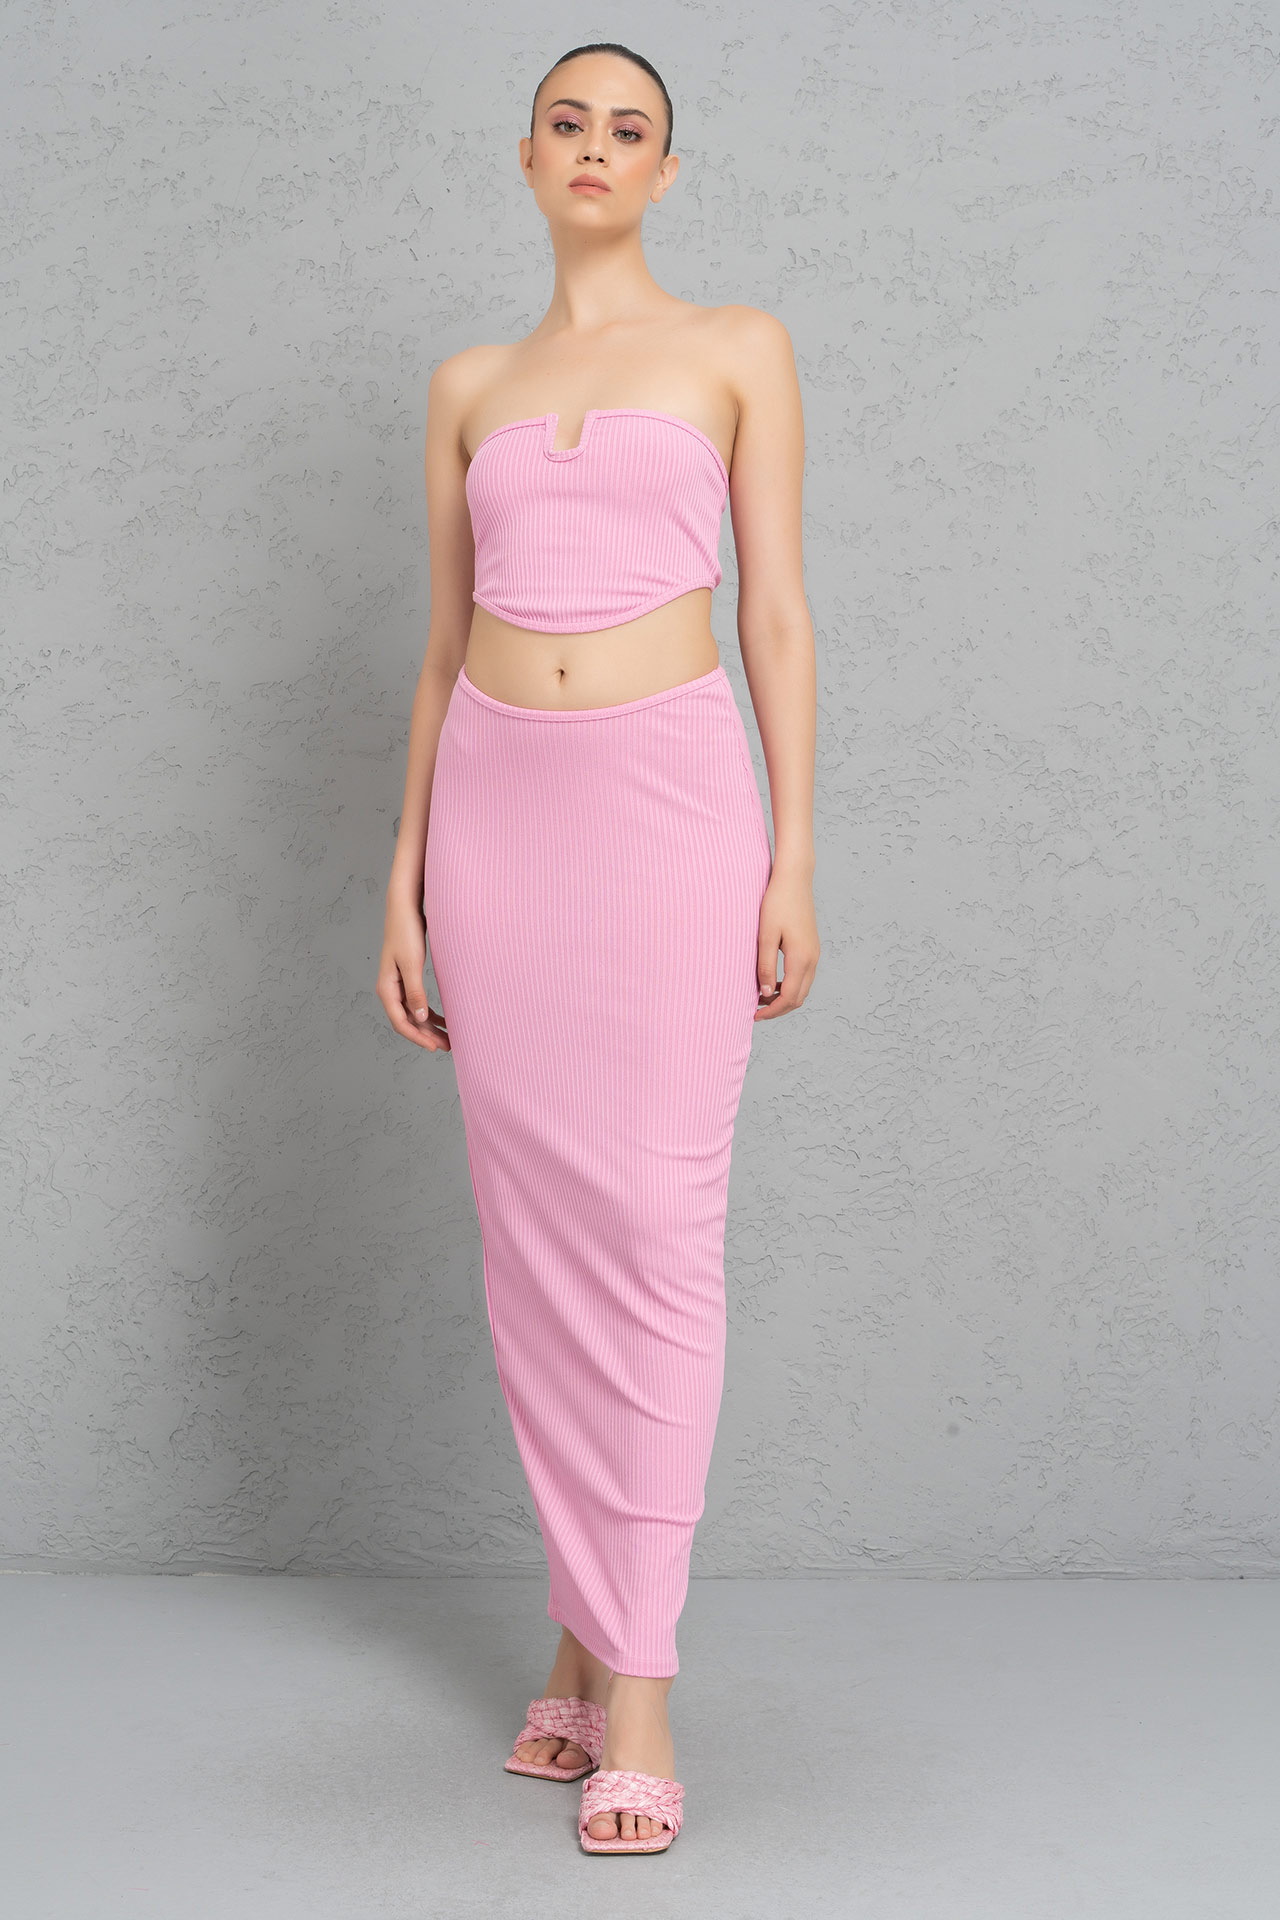 Wholesale New Pink U-Wire Tube Top & Skirt Set